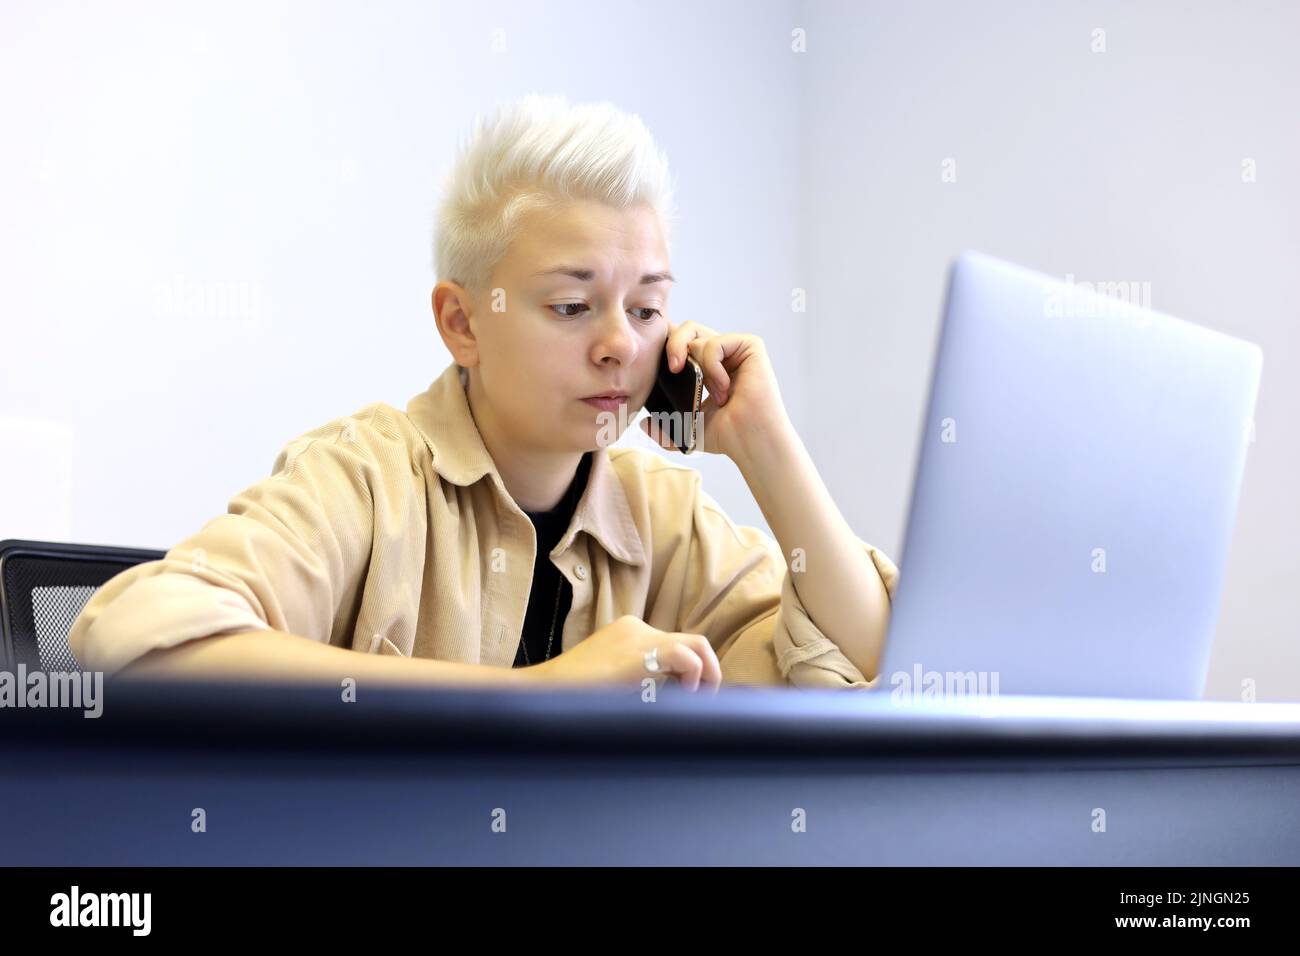 Girl with short blonde hair sitting at laptop and talking on mobile phone. Tomboy lifestyle, concept of office work, business assistant Stock Photo